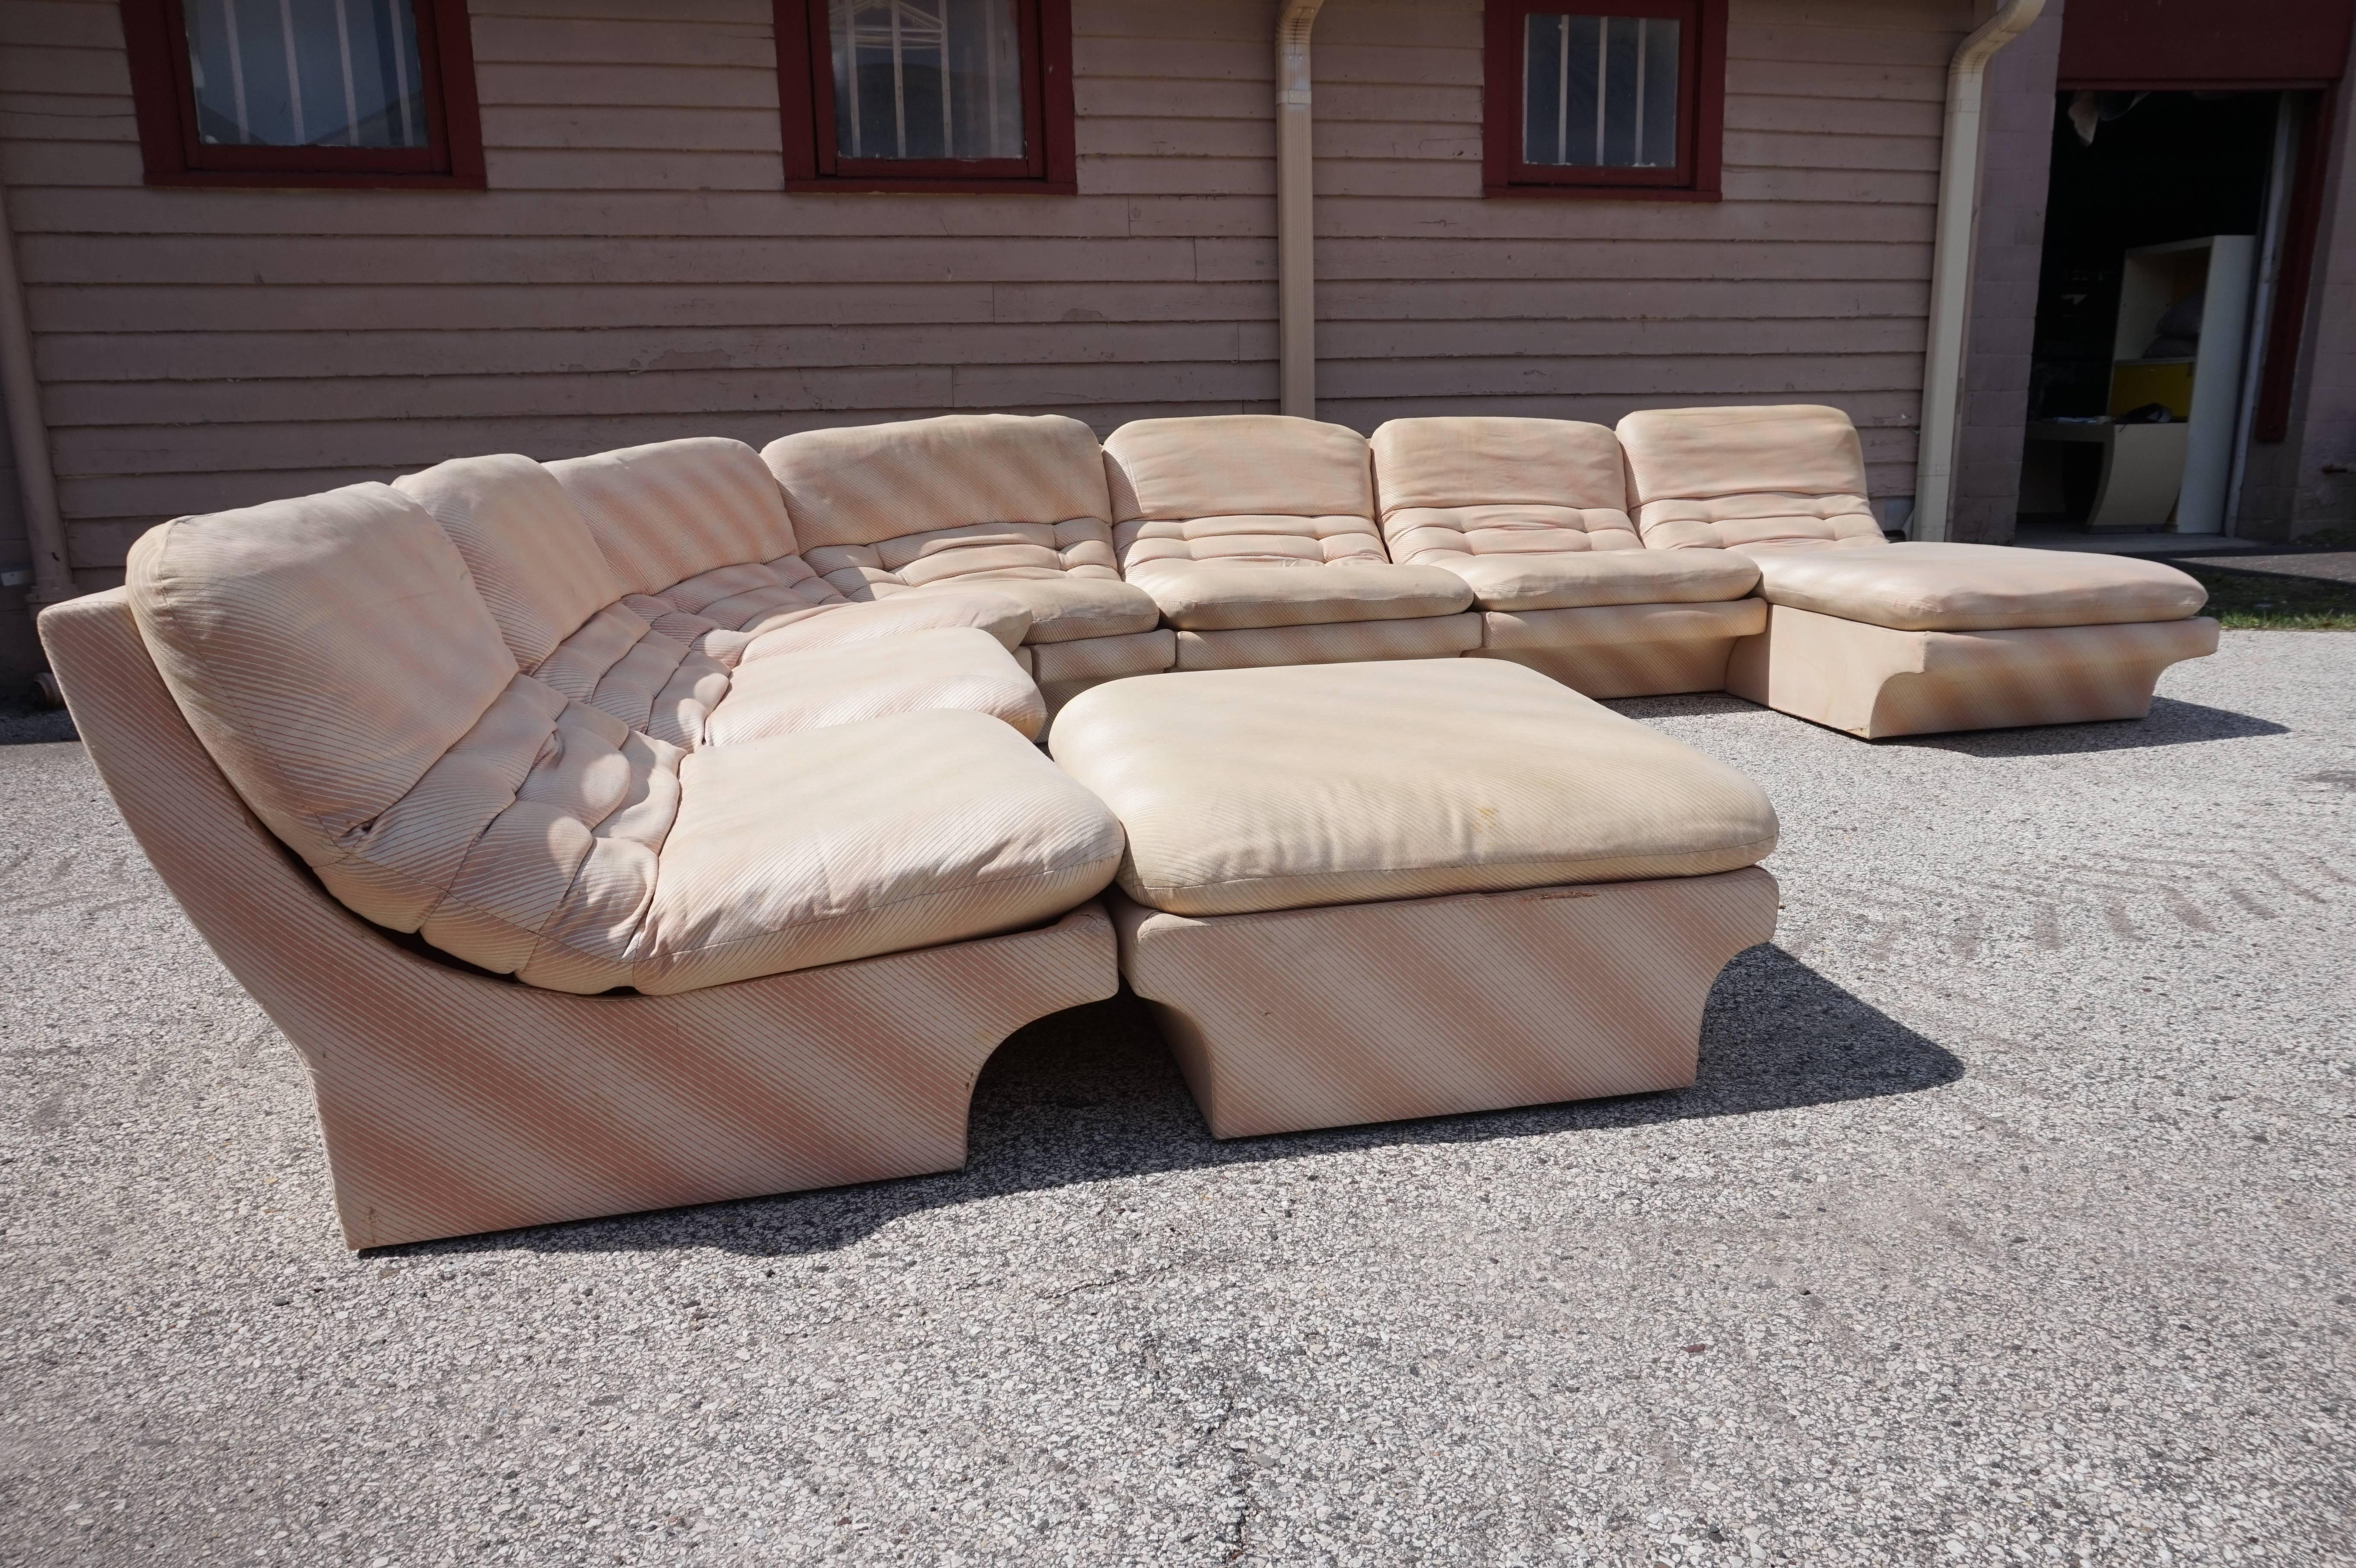 Awesome eight part sectional sofa by Preview in the style of Vladimir Kagan. This set will need to be reupholstered but that is what you designers are looking for any way-right? This set measures 30" T x 149" L x 110" D as shown.